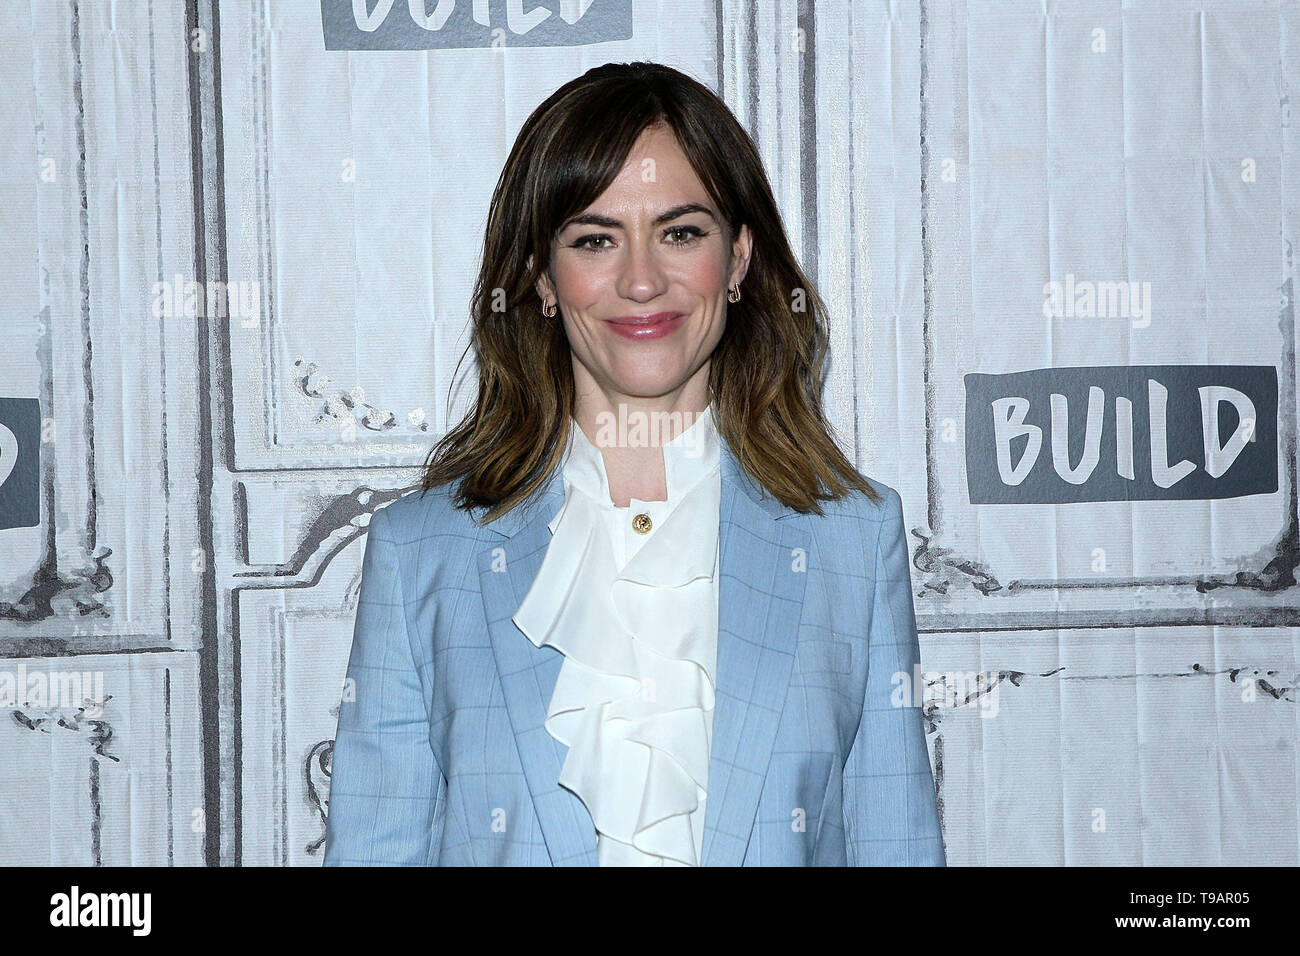 New York, USA. 17 May, 2019. Maggie Siff at the Build Series with Maggie Siff, discussing her roles in Showtime's 'Billions' and the Sam Shepard play, 'Curse of the Starving Class' at BUILD Studio. Credit: Steve Mack/Alamy Live News Stock Photo